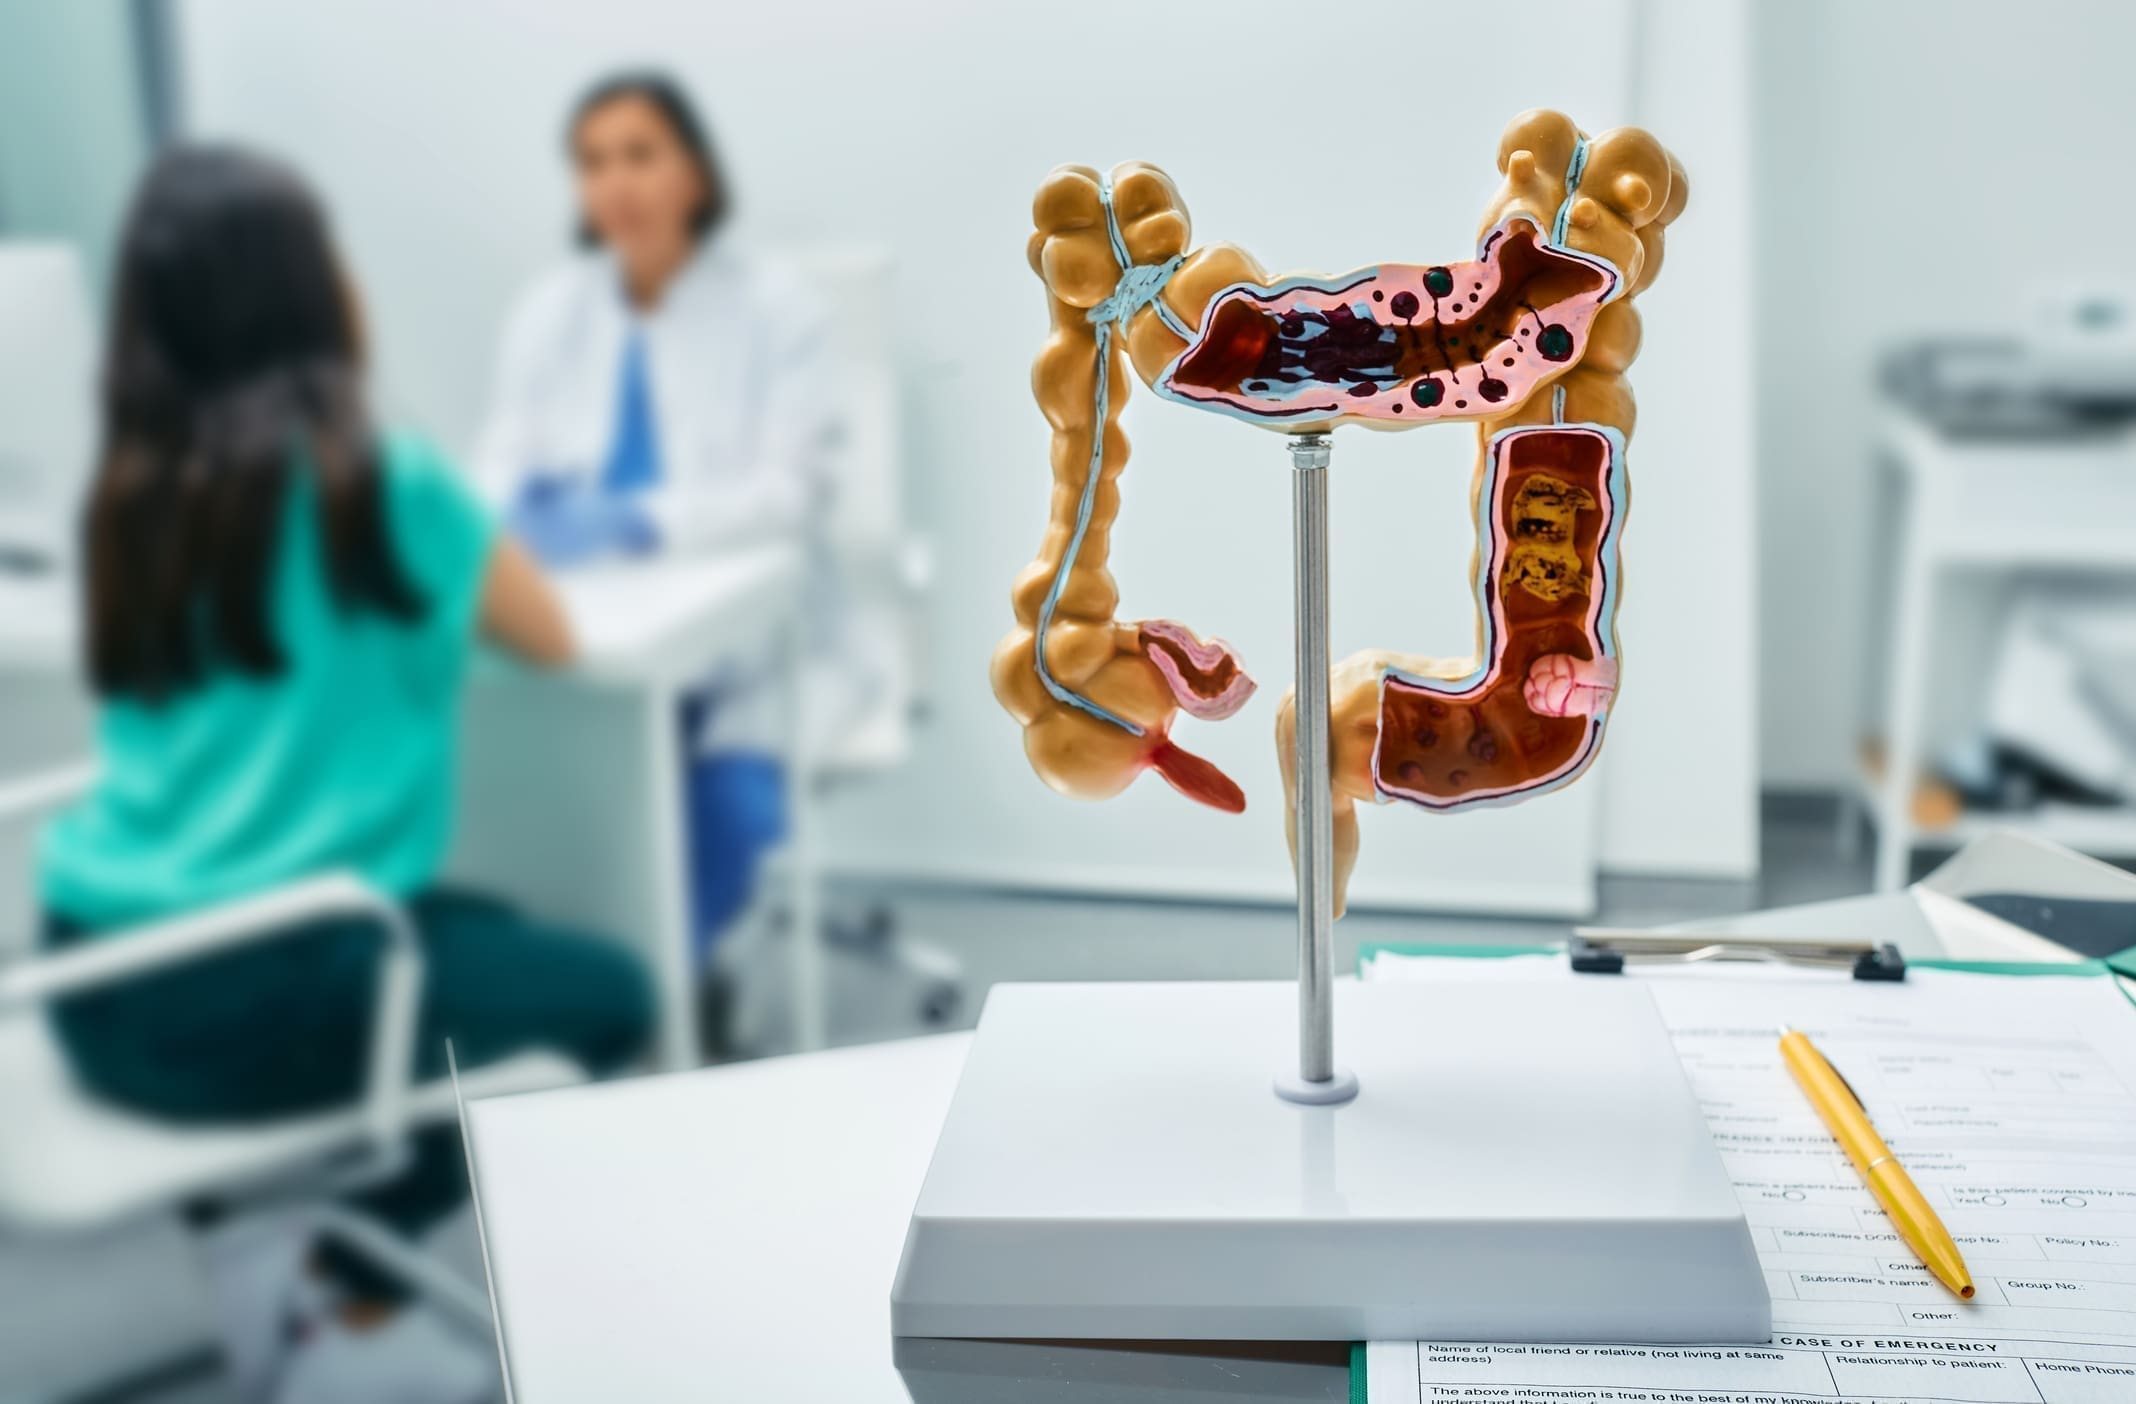 A plastic model of intestines sits on a table in a doctor’s office where a patient is consulting with a doctor about her Crohn’s disease.